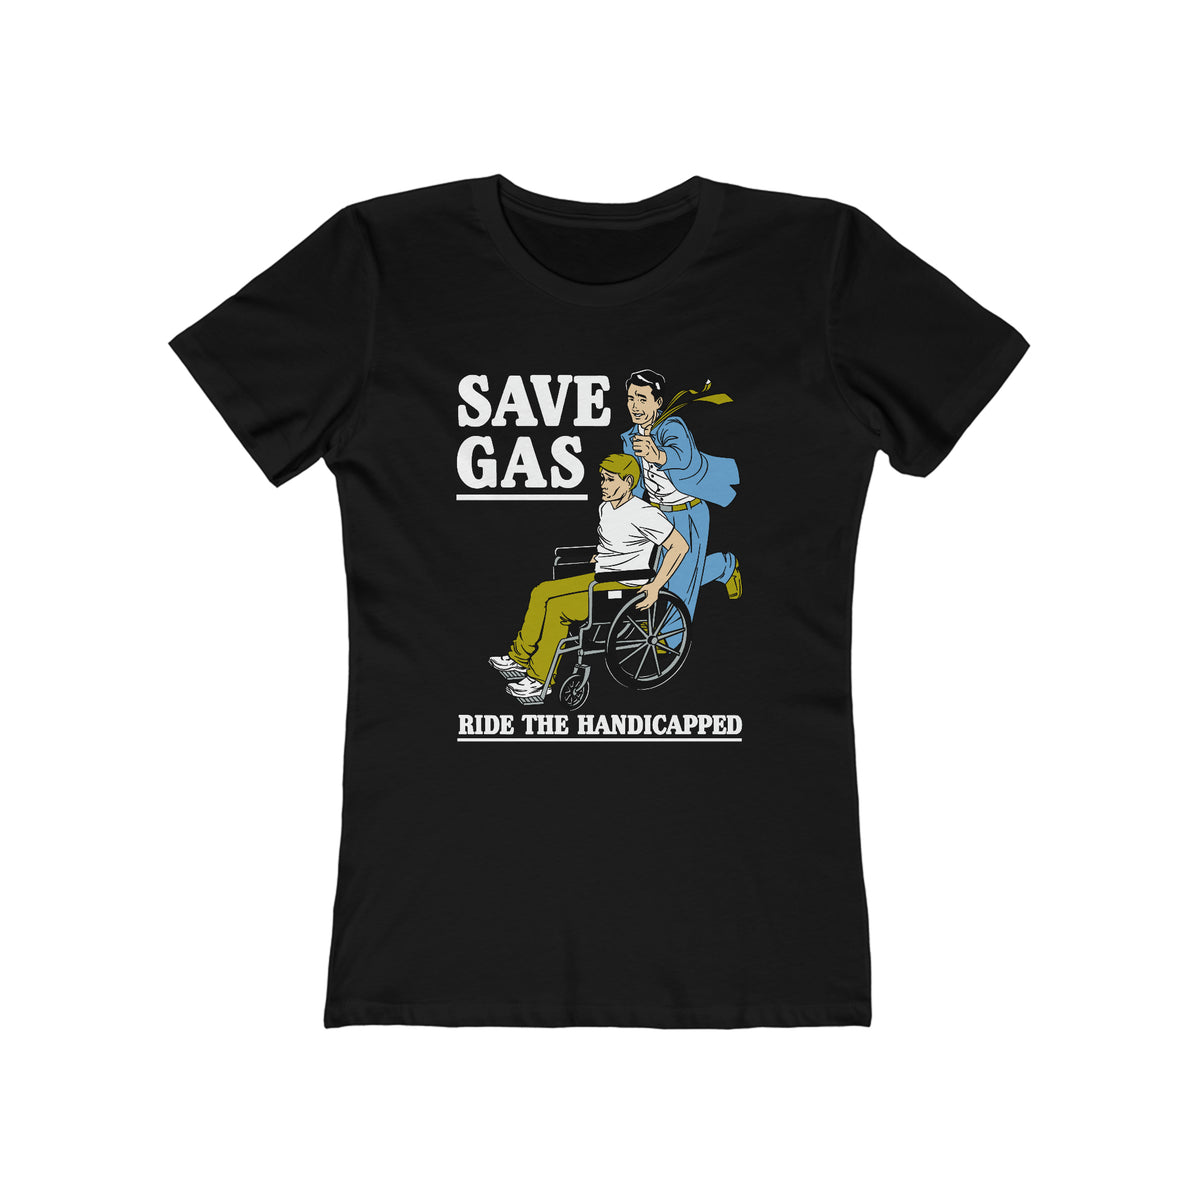 Save Gas - Ride The Handicapped - Women’s T-Shirt